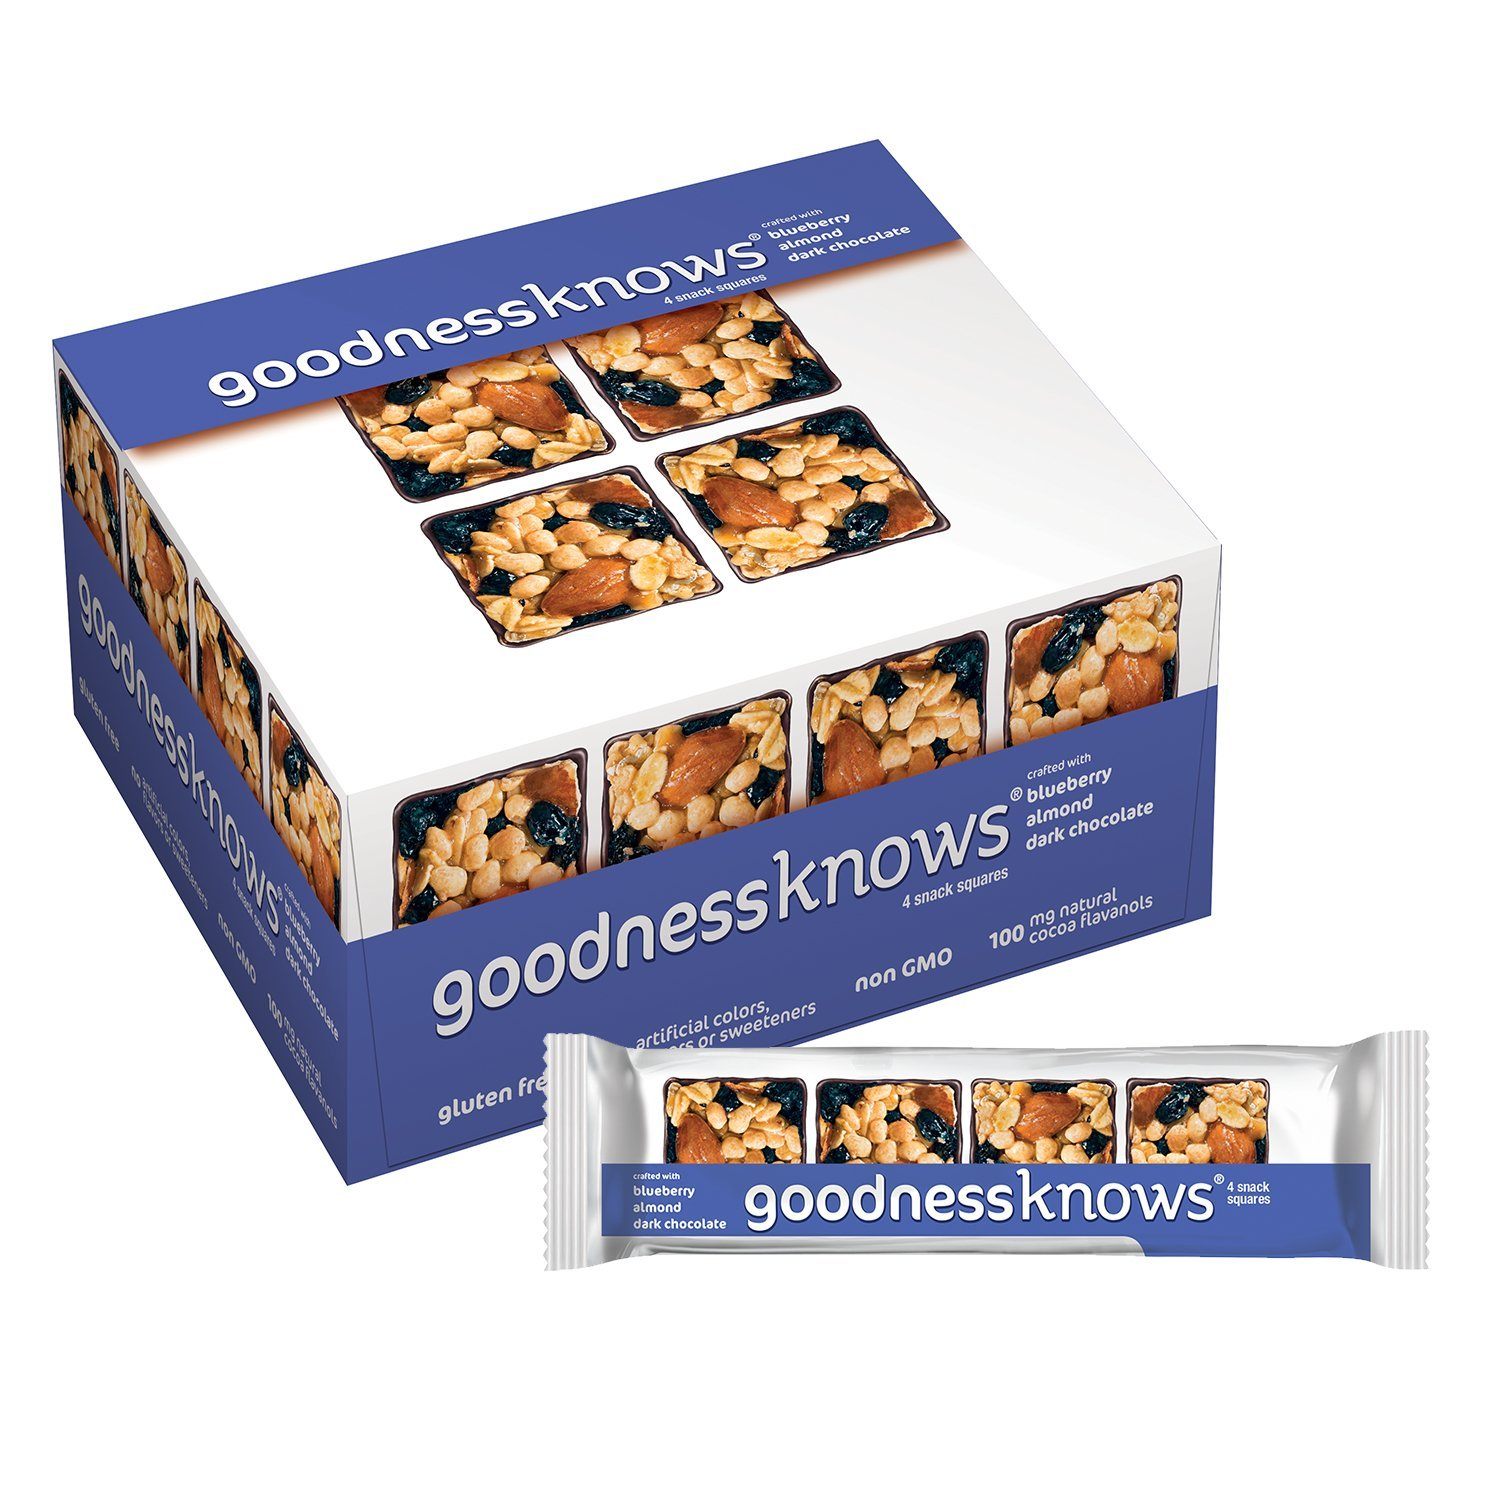 Goodnessknows Blueberry Almond Dark Chocolate Bars ONLY $.88 Each Shipped!